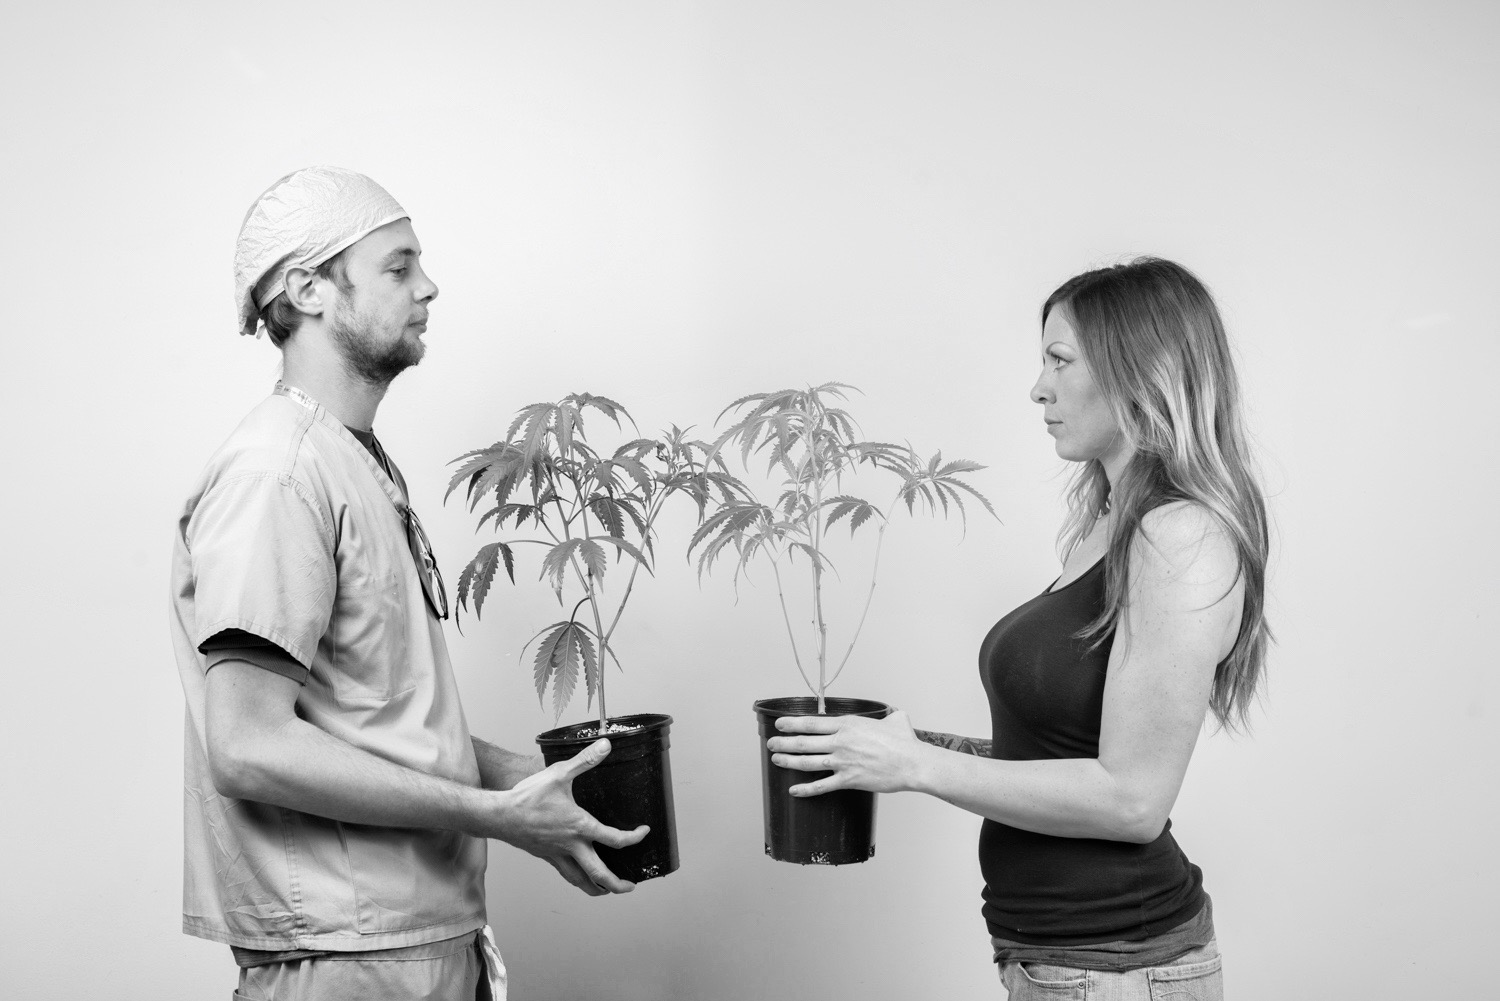 Man And Woman Holding Cannabis Plants